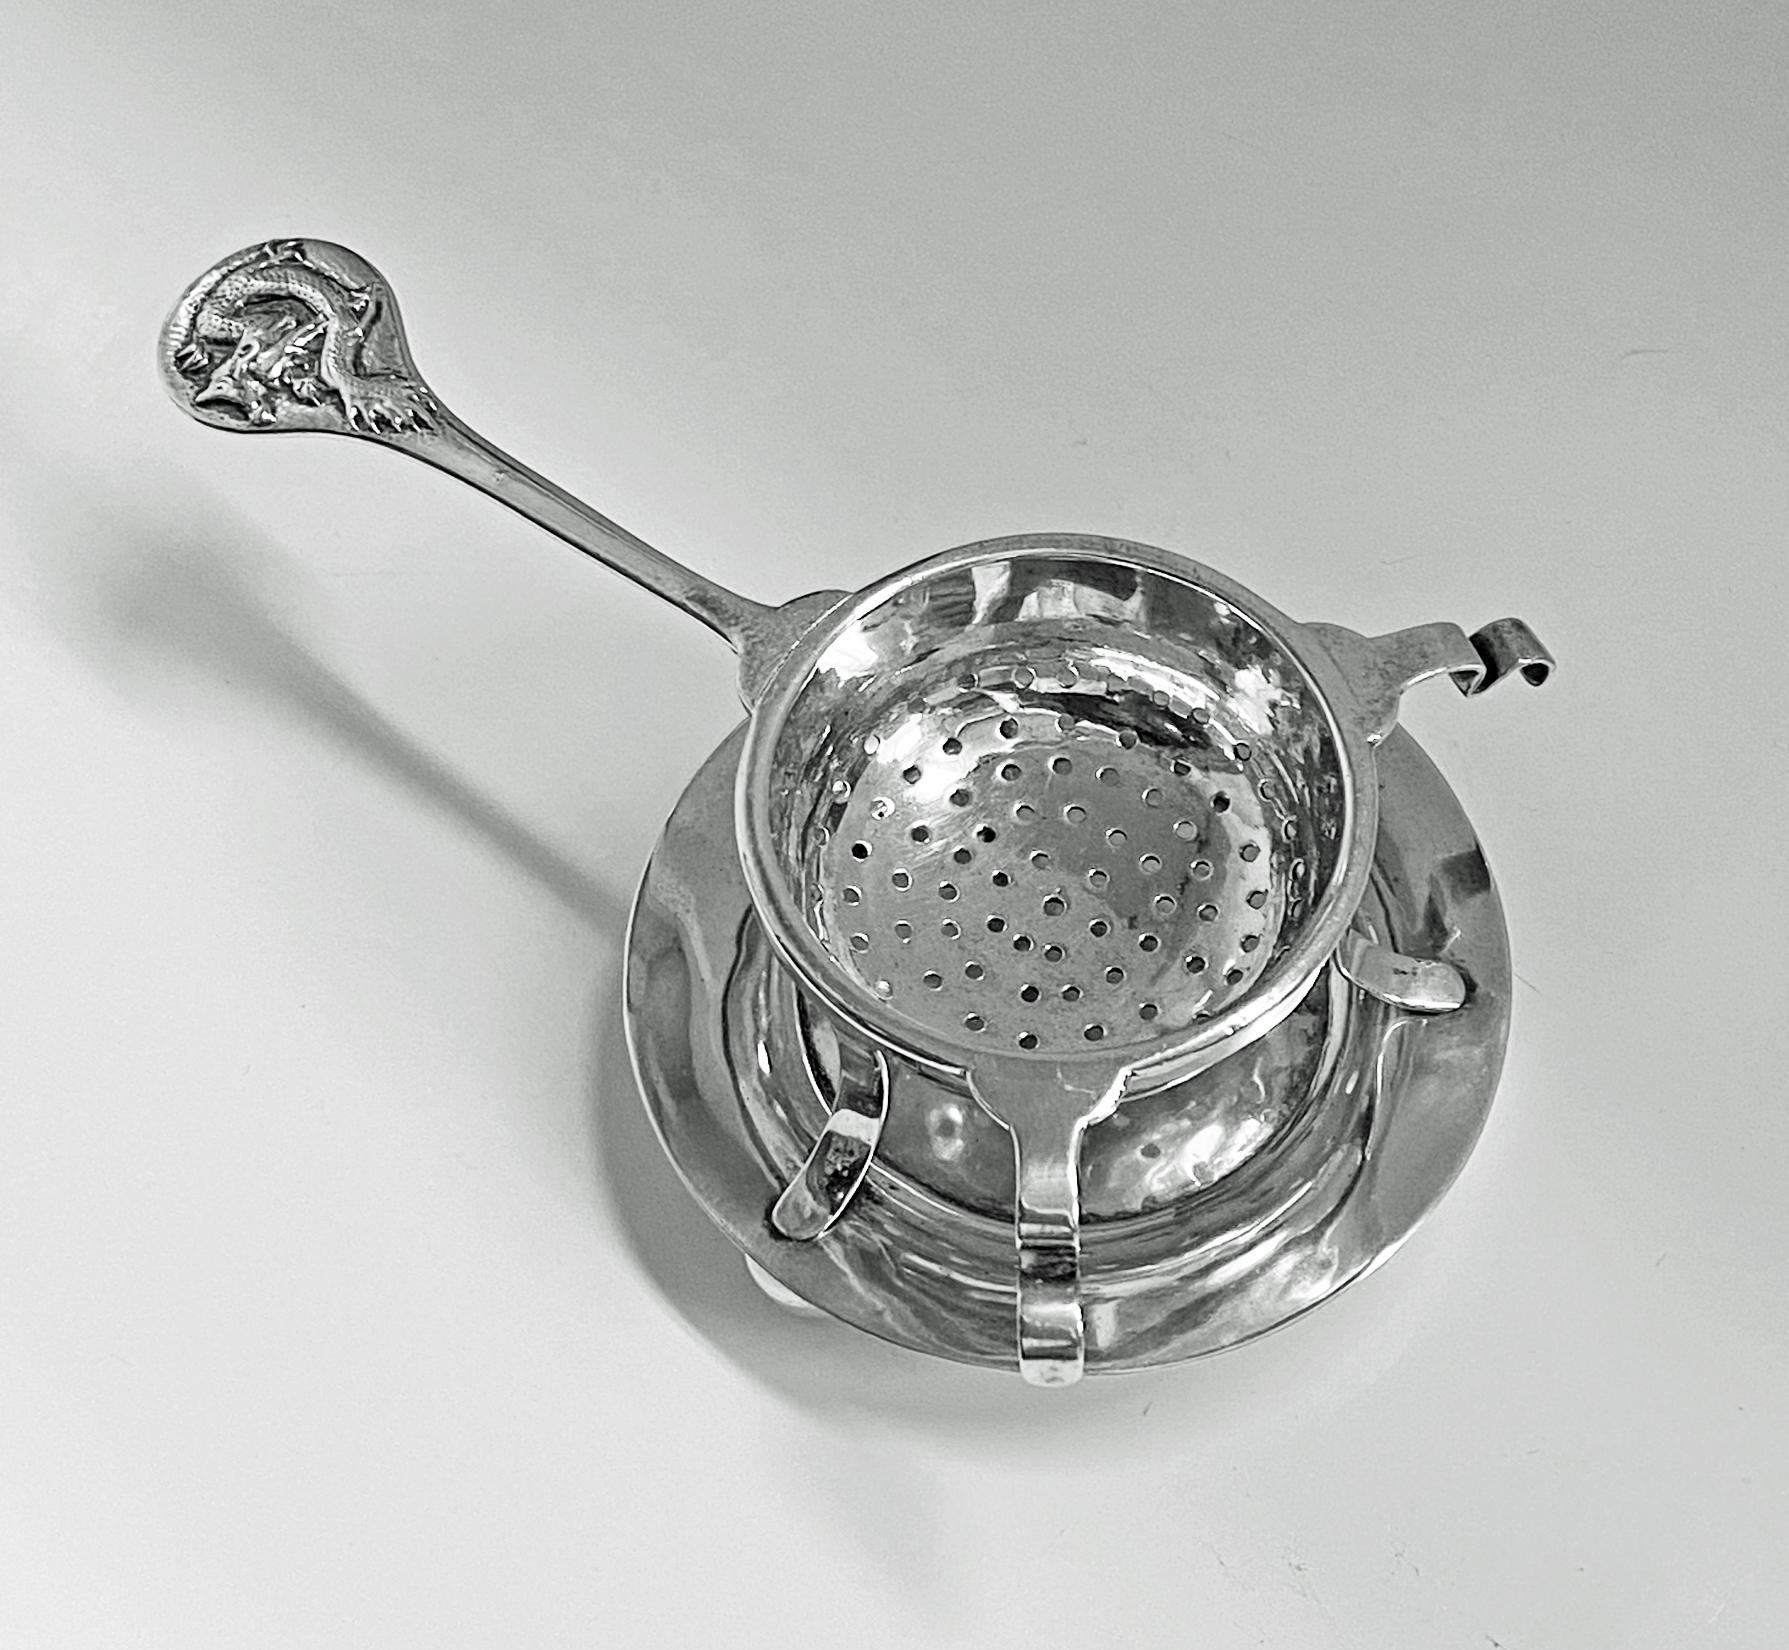 Late 19th century Chinese export silver tea strainer on stand, Tuck Chang, Shanghai, C.1900. Plain design with dragon embellished handle in relief; the bowl pierced, all on plain silver stand with three bun supports. Measures: Length of strainer